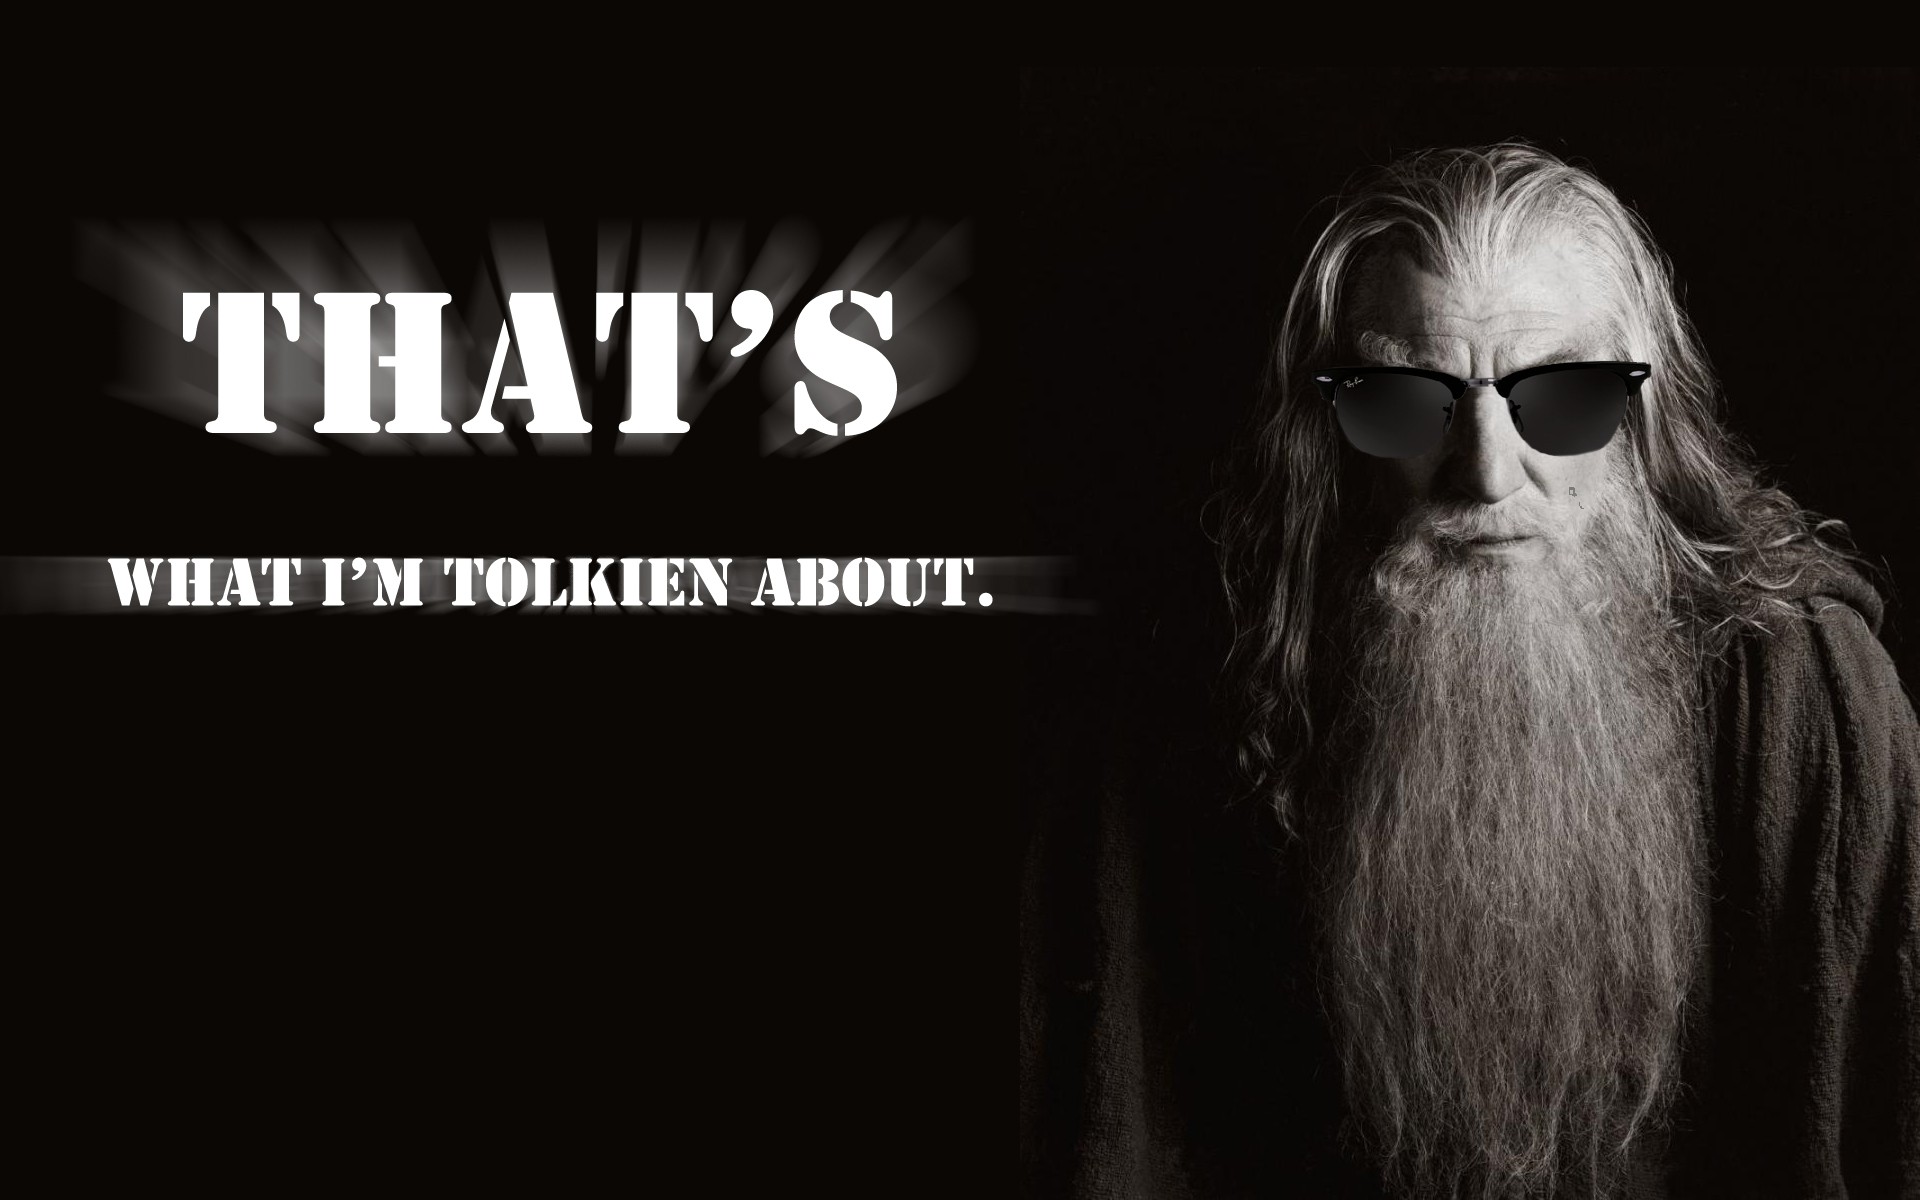 ... 21, 2012 at 1920 Ã— 1200 in RANT #1: THE LORD OF THE RINGS REVISITED